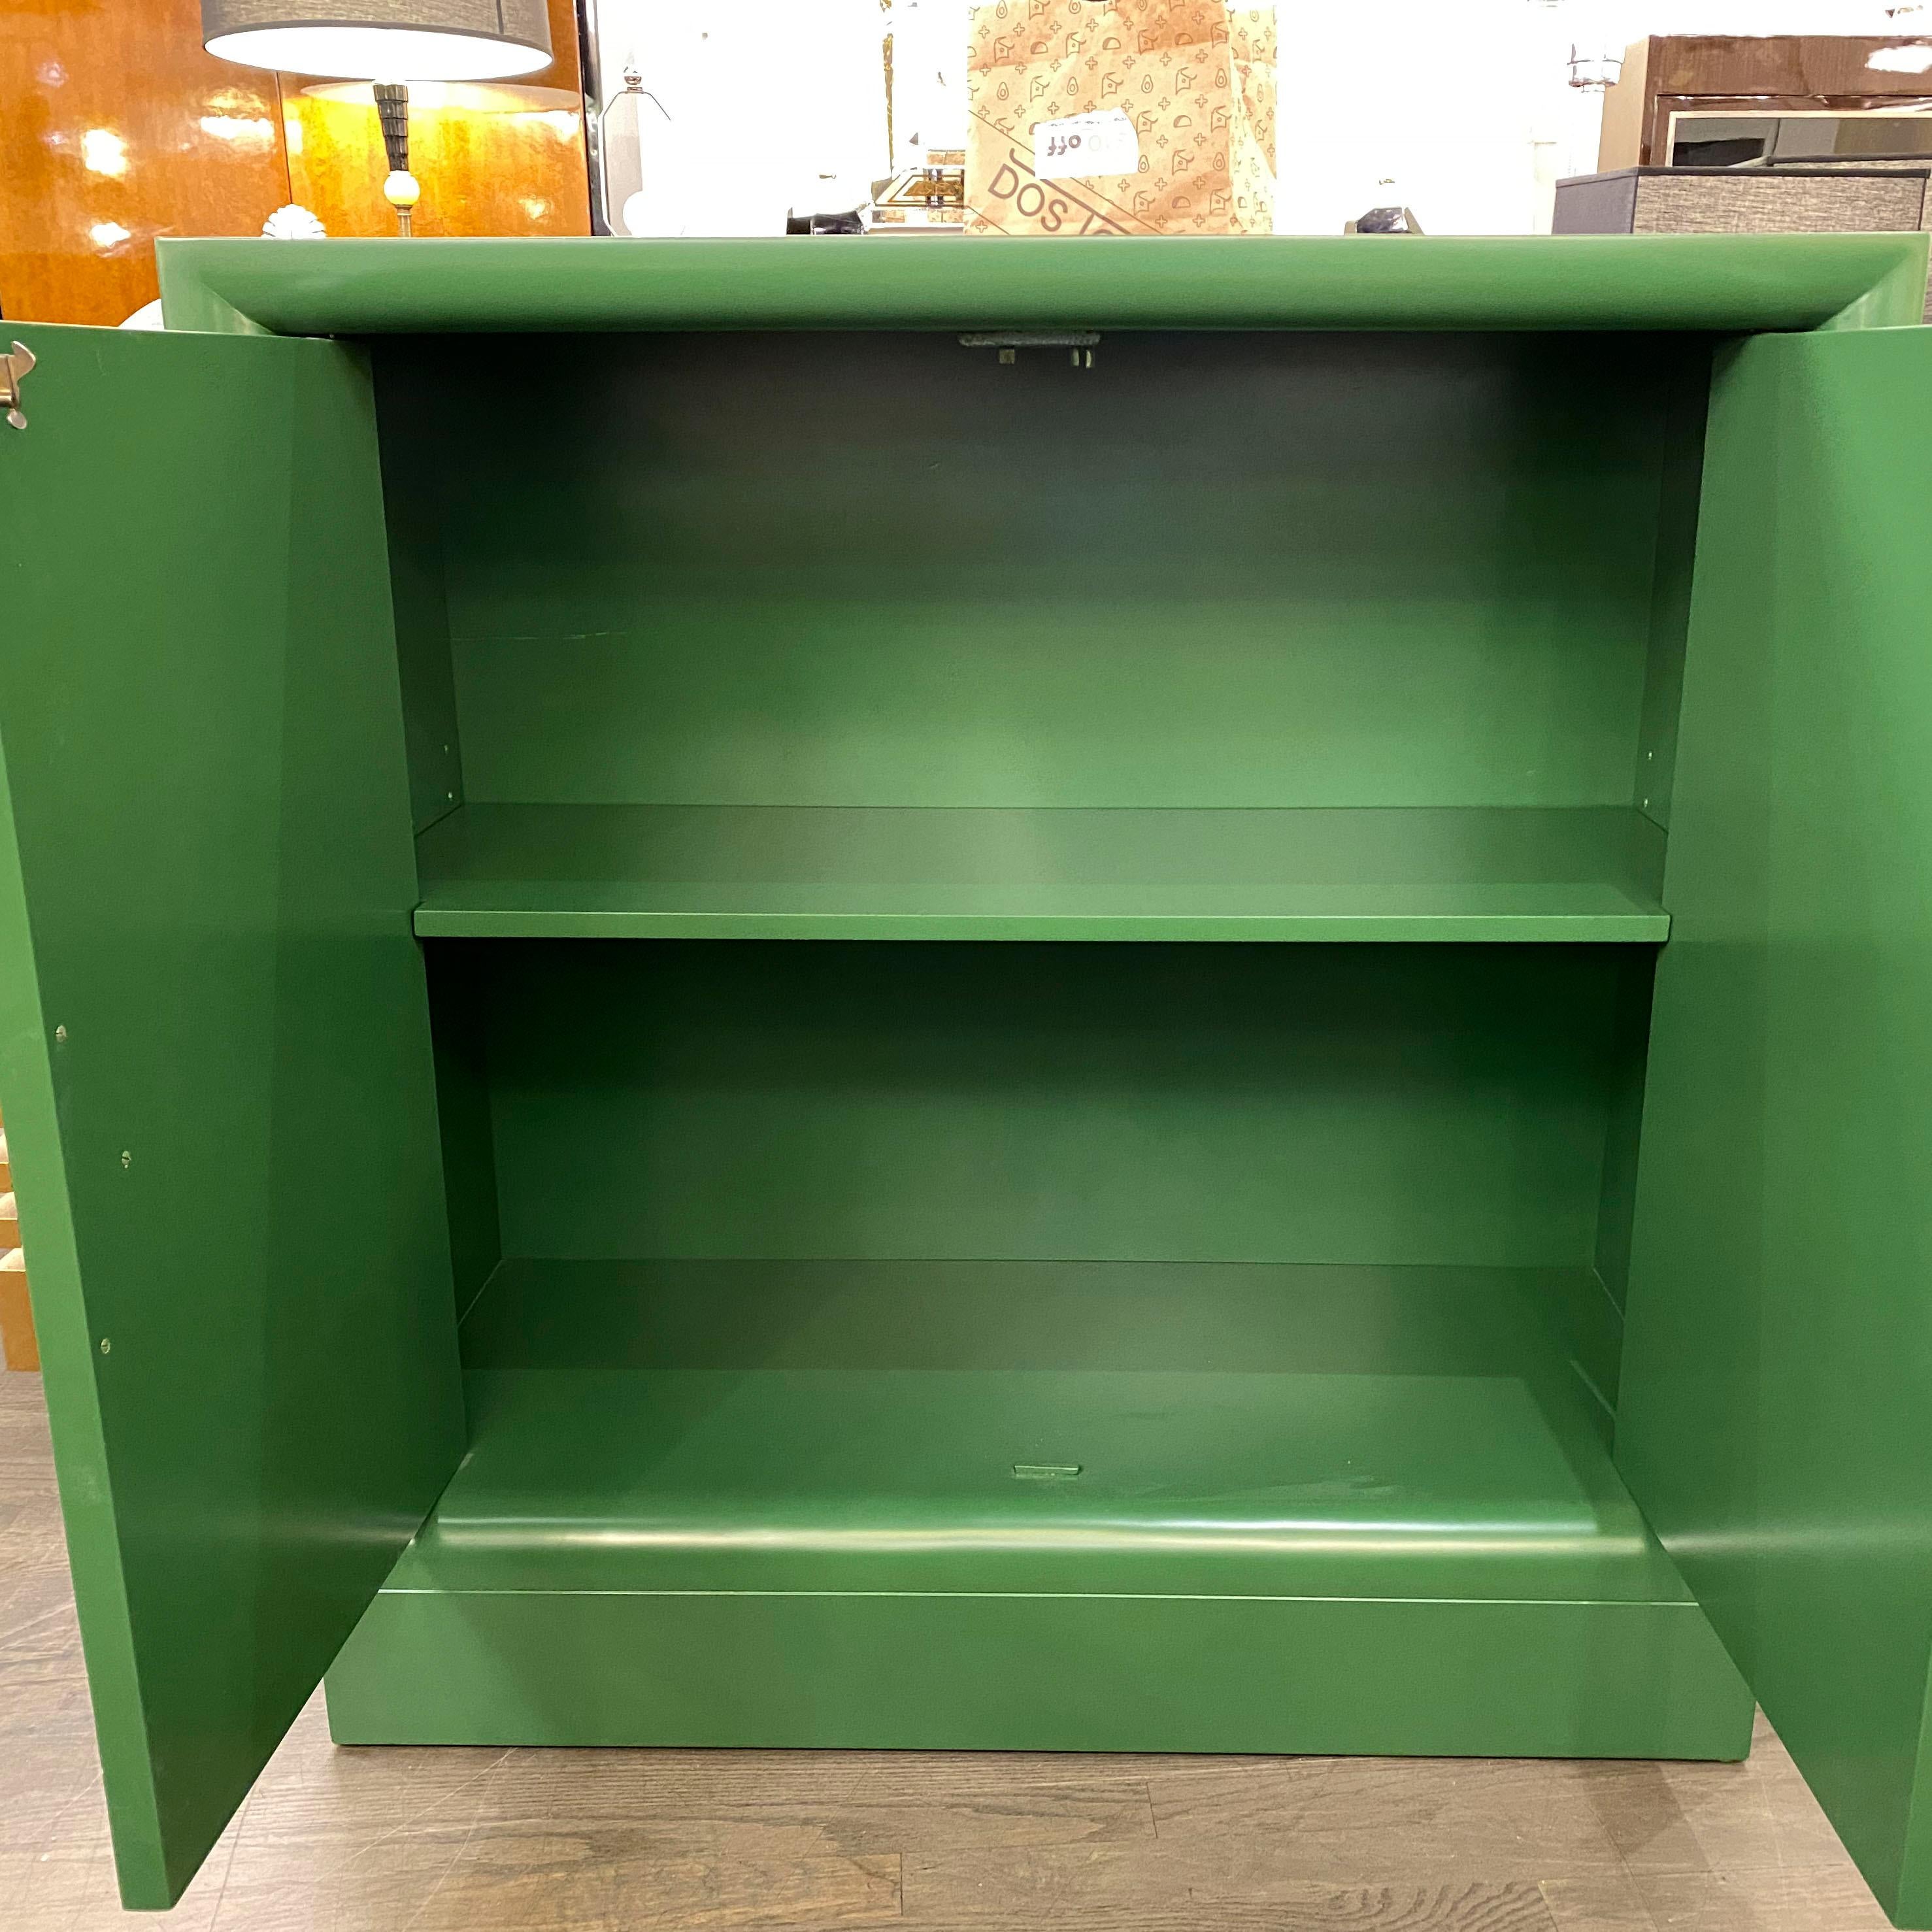 Mid-20th Century Mid-Century Modern Kelly Green Dry Bar/Sideboard W/ Gilt Pulls Signed James Mont